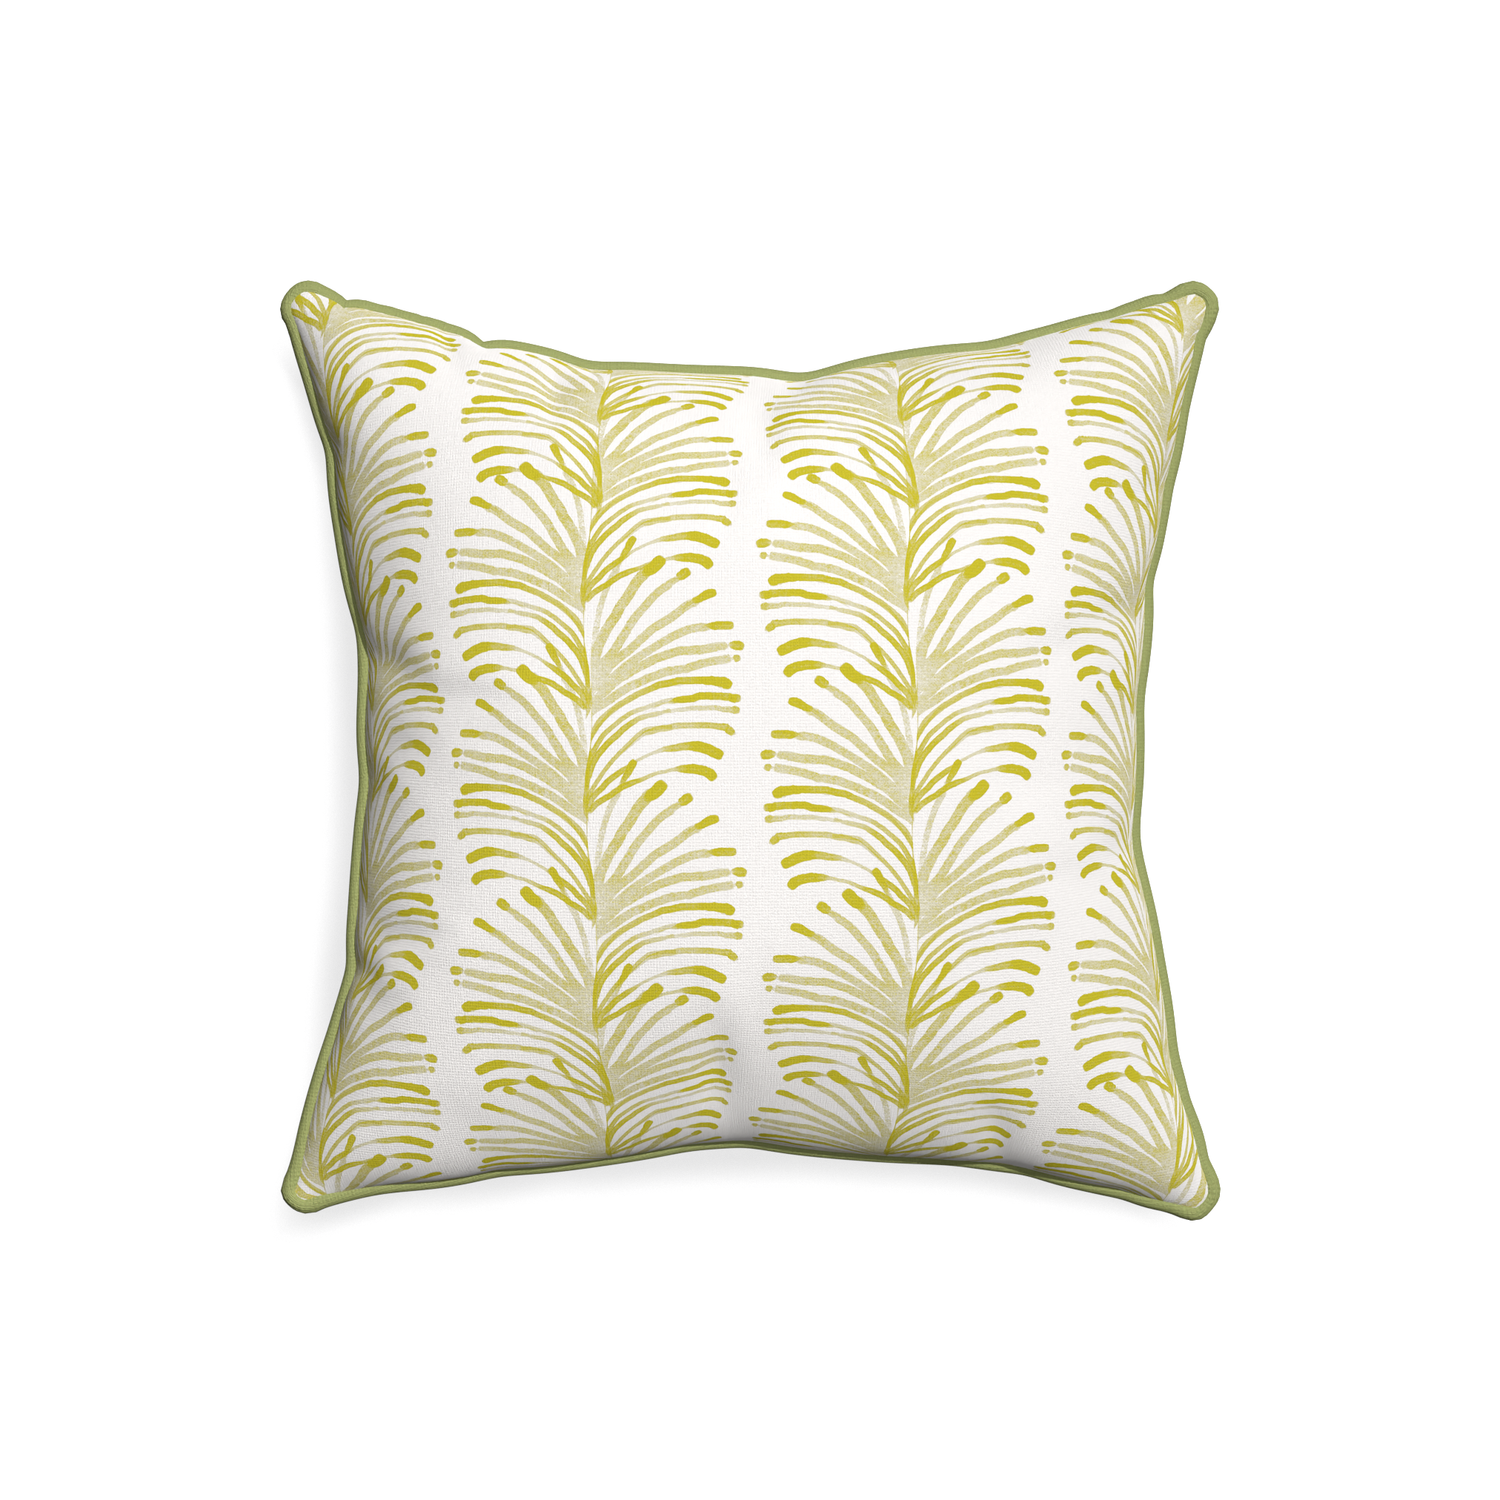 20-square emma chartreuse custom yellow stripe chartreusepillow with moss piping on white background